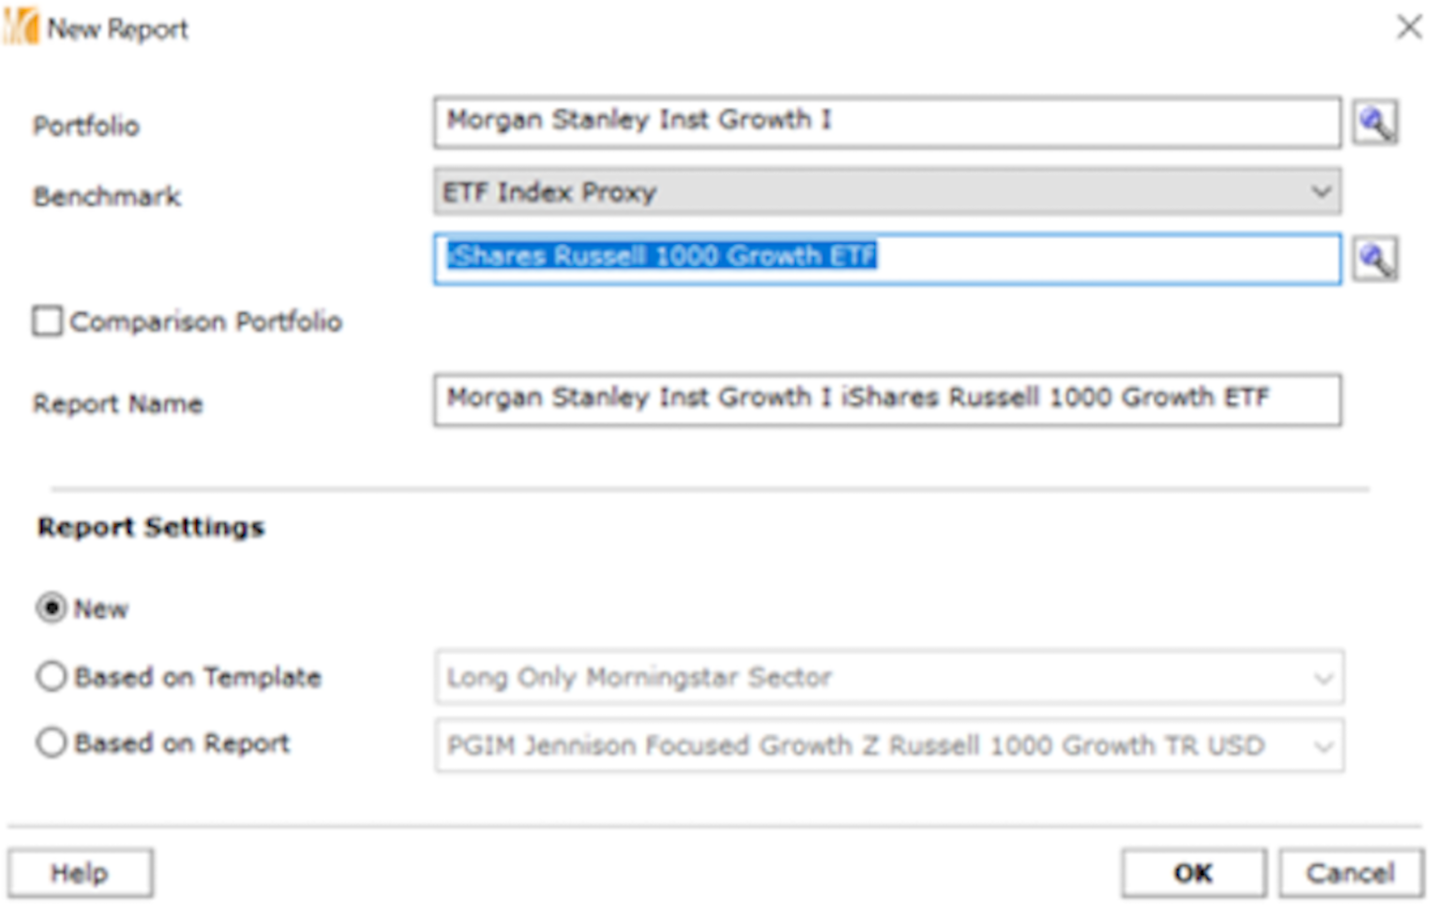 Morningstar Direct’s Portfolio Analysis module for Morgan Stanley Institutional Growth’s MSEQX